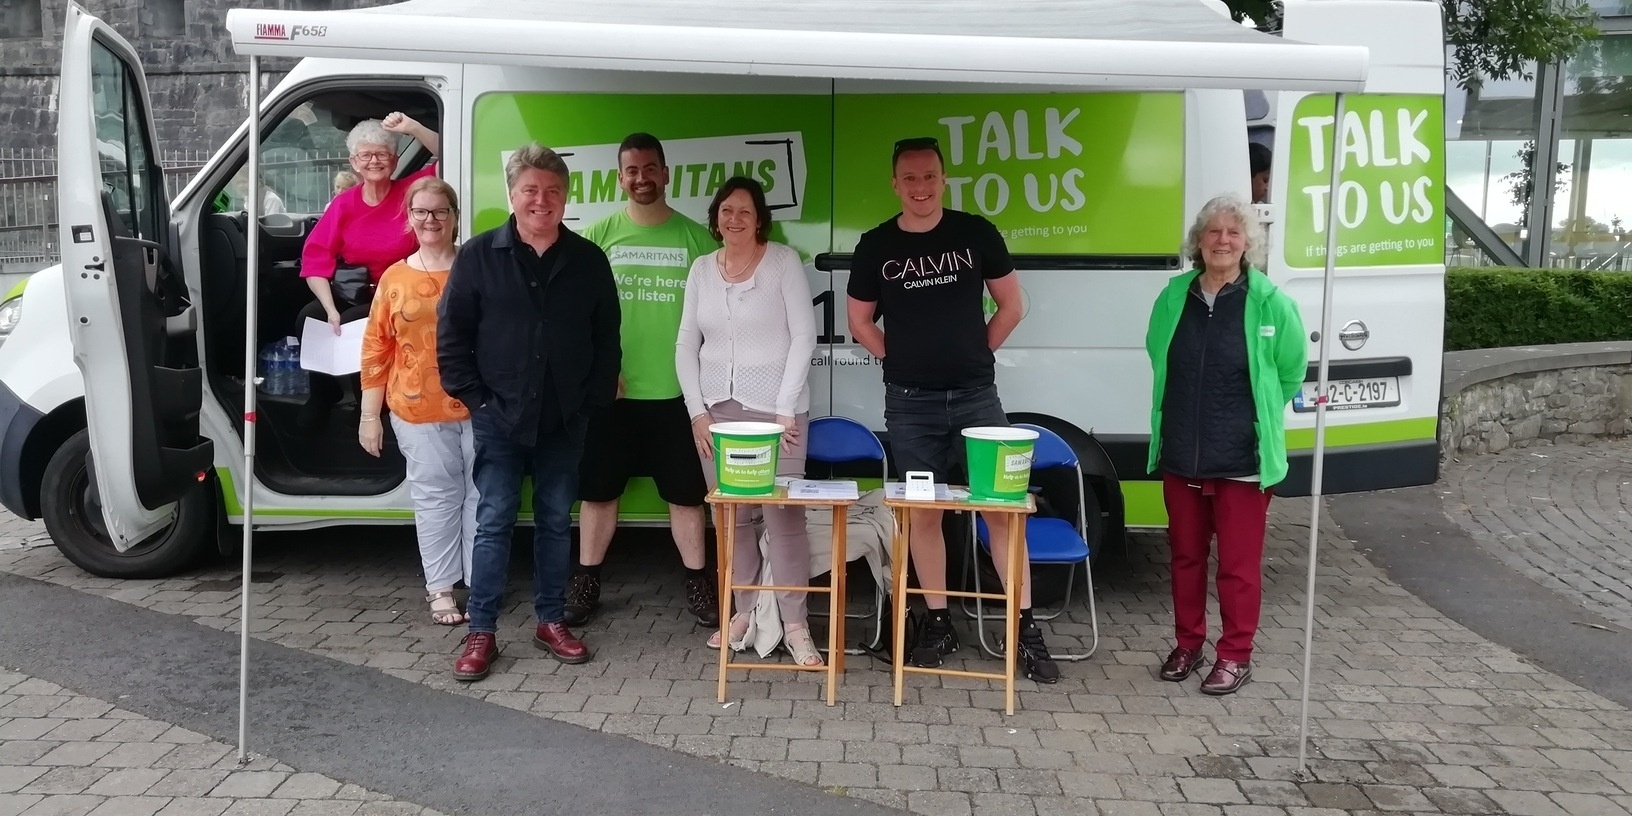 There was an incredible turnout for the event, with many locals and spectators joining the Samaritans on their charity stroll, including ambassador Pat Shortt.